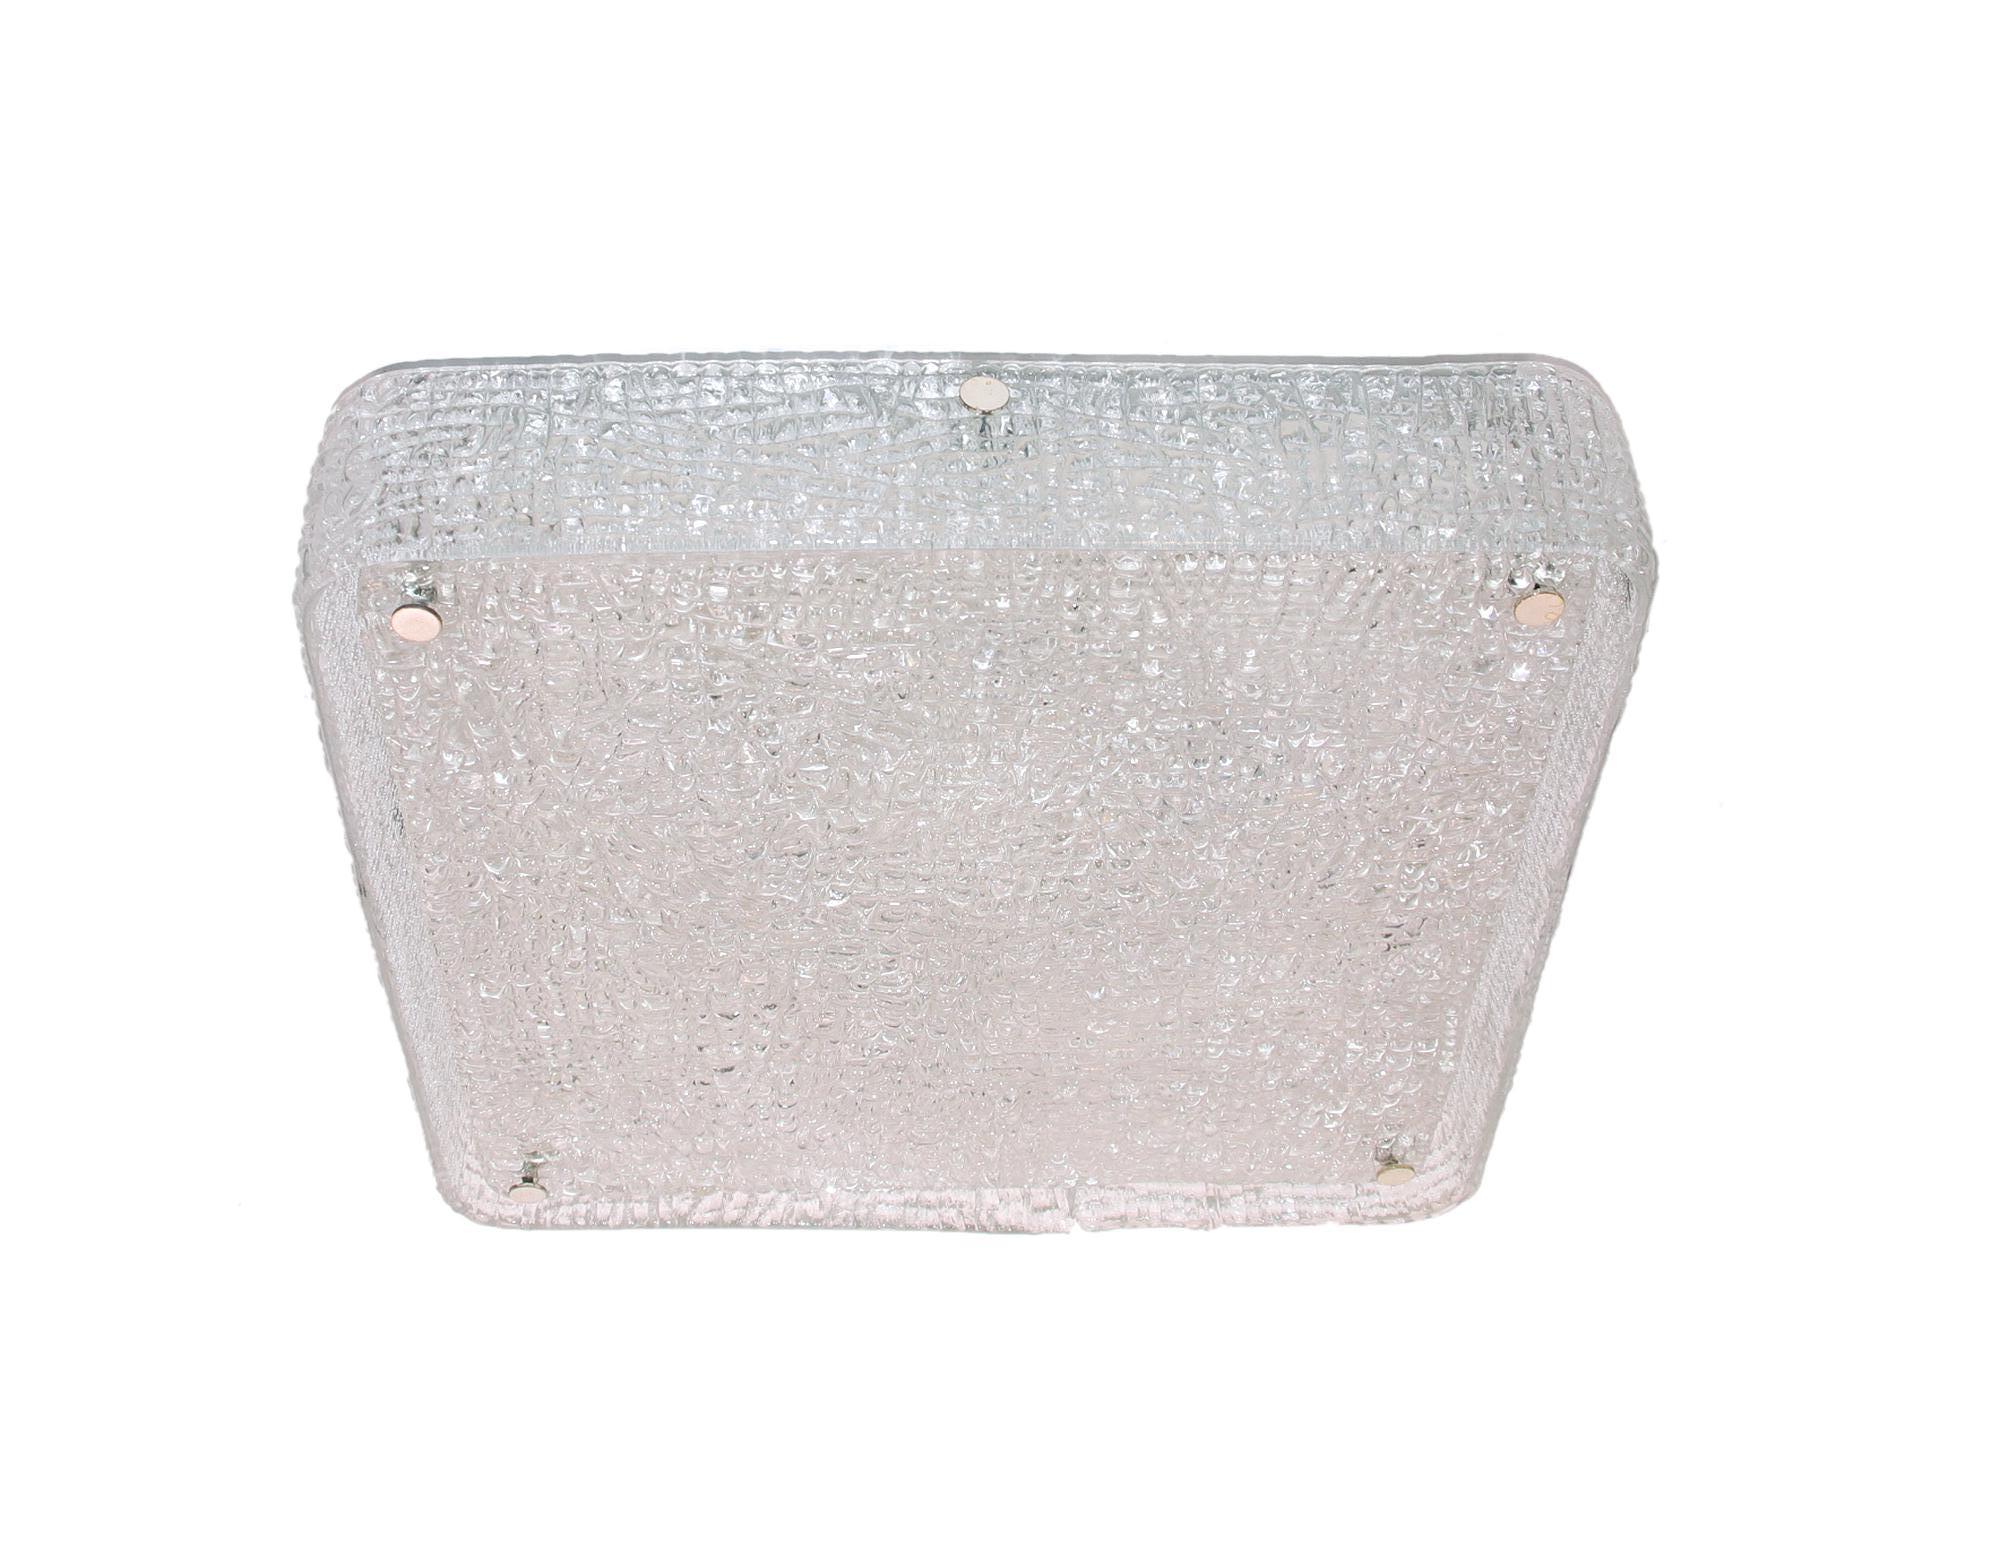 Gorgeous large two part rectangular-shaped flush mount ceiling light with one ring outside and a flat disc made of heavy textured clear iced glass on a white metal frame with nickel finals. Manufactured by Kaiser Lighting, Germany in the 1960s.